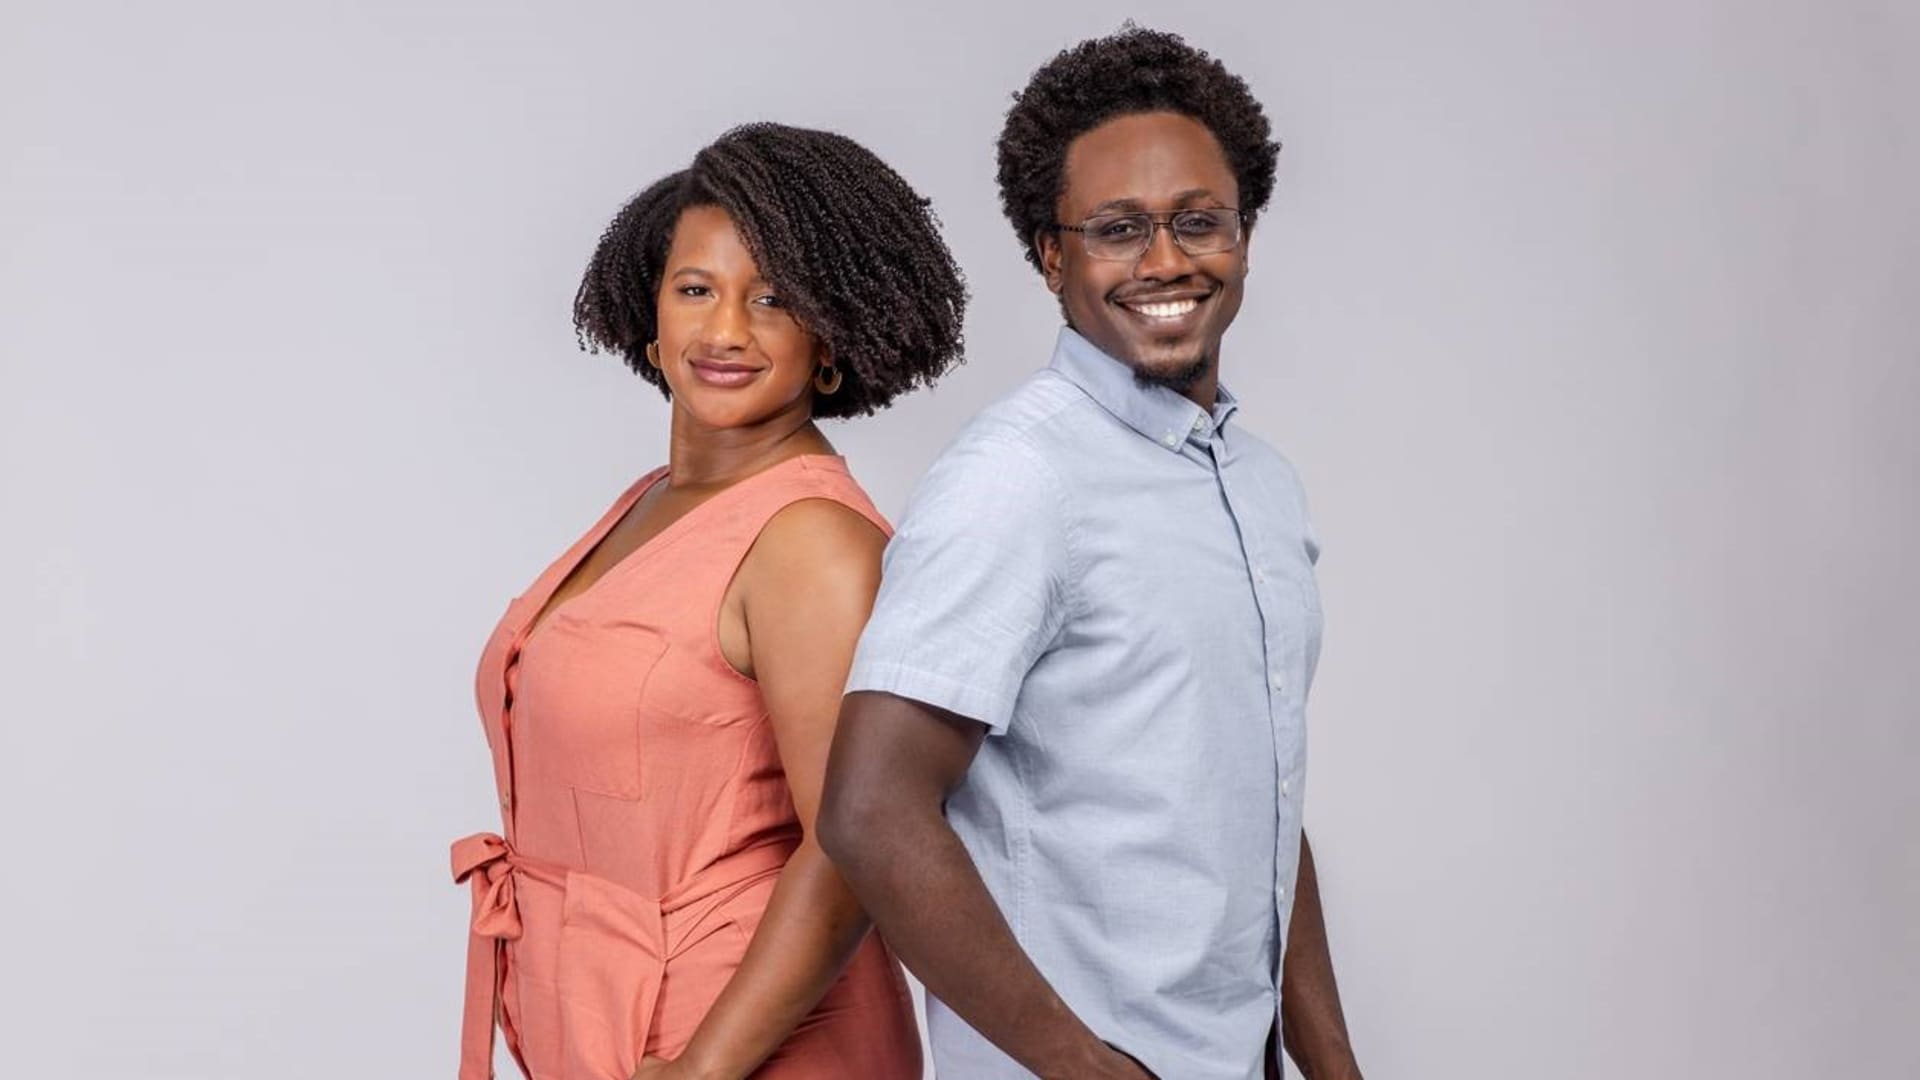 CurlMix founders Kim and Tim Lewis self-funded their brand but ultimately received seed capital from former LinkedIn CEO Jeff Weiner.